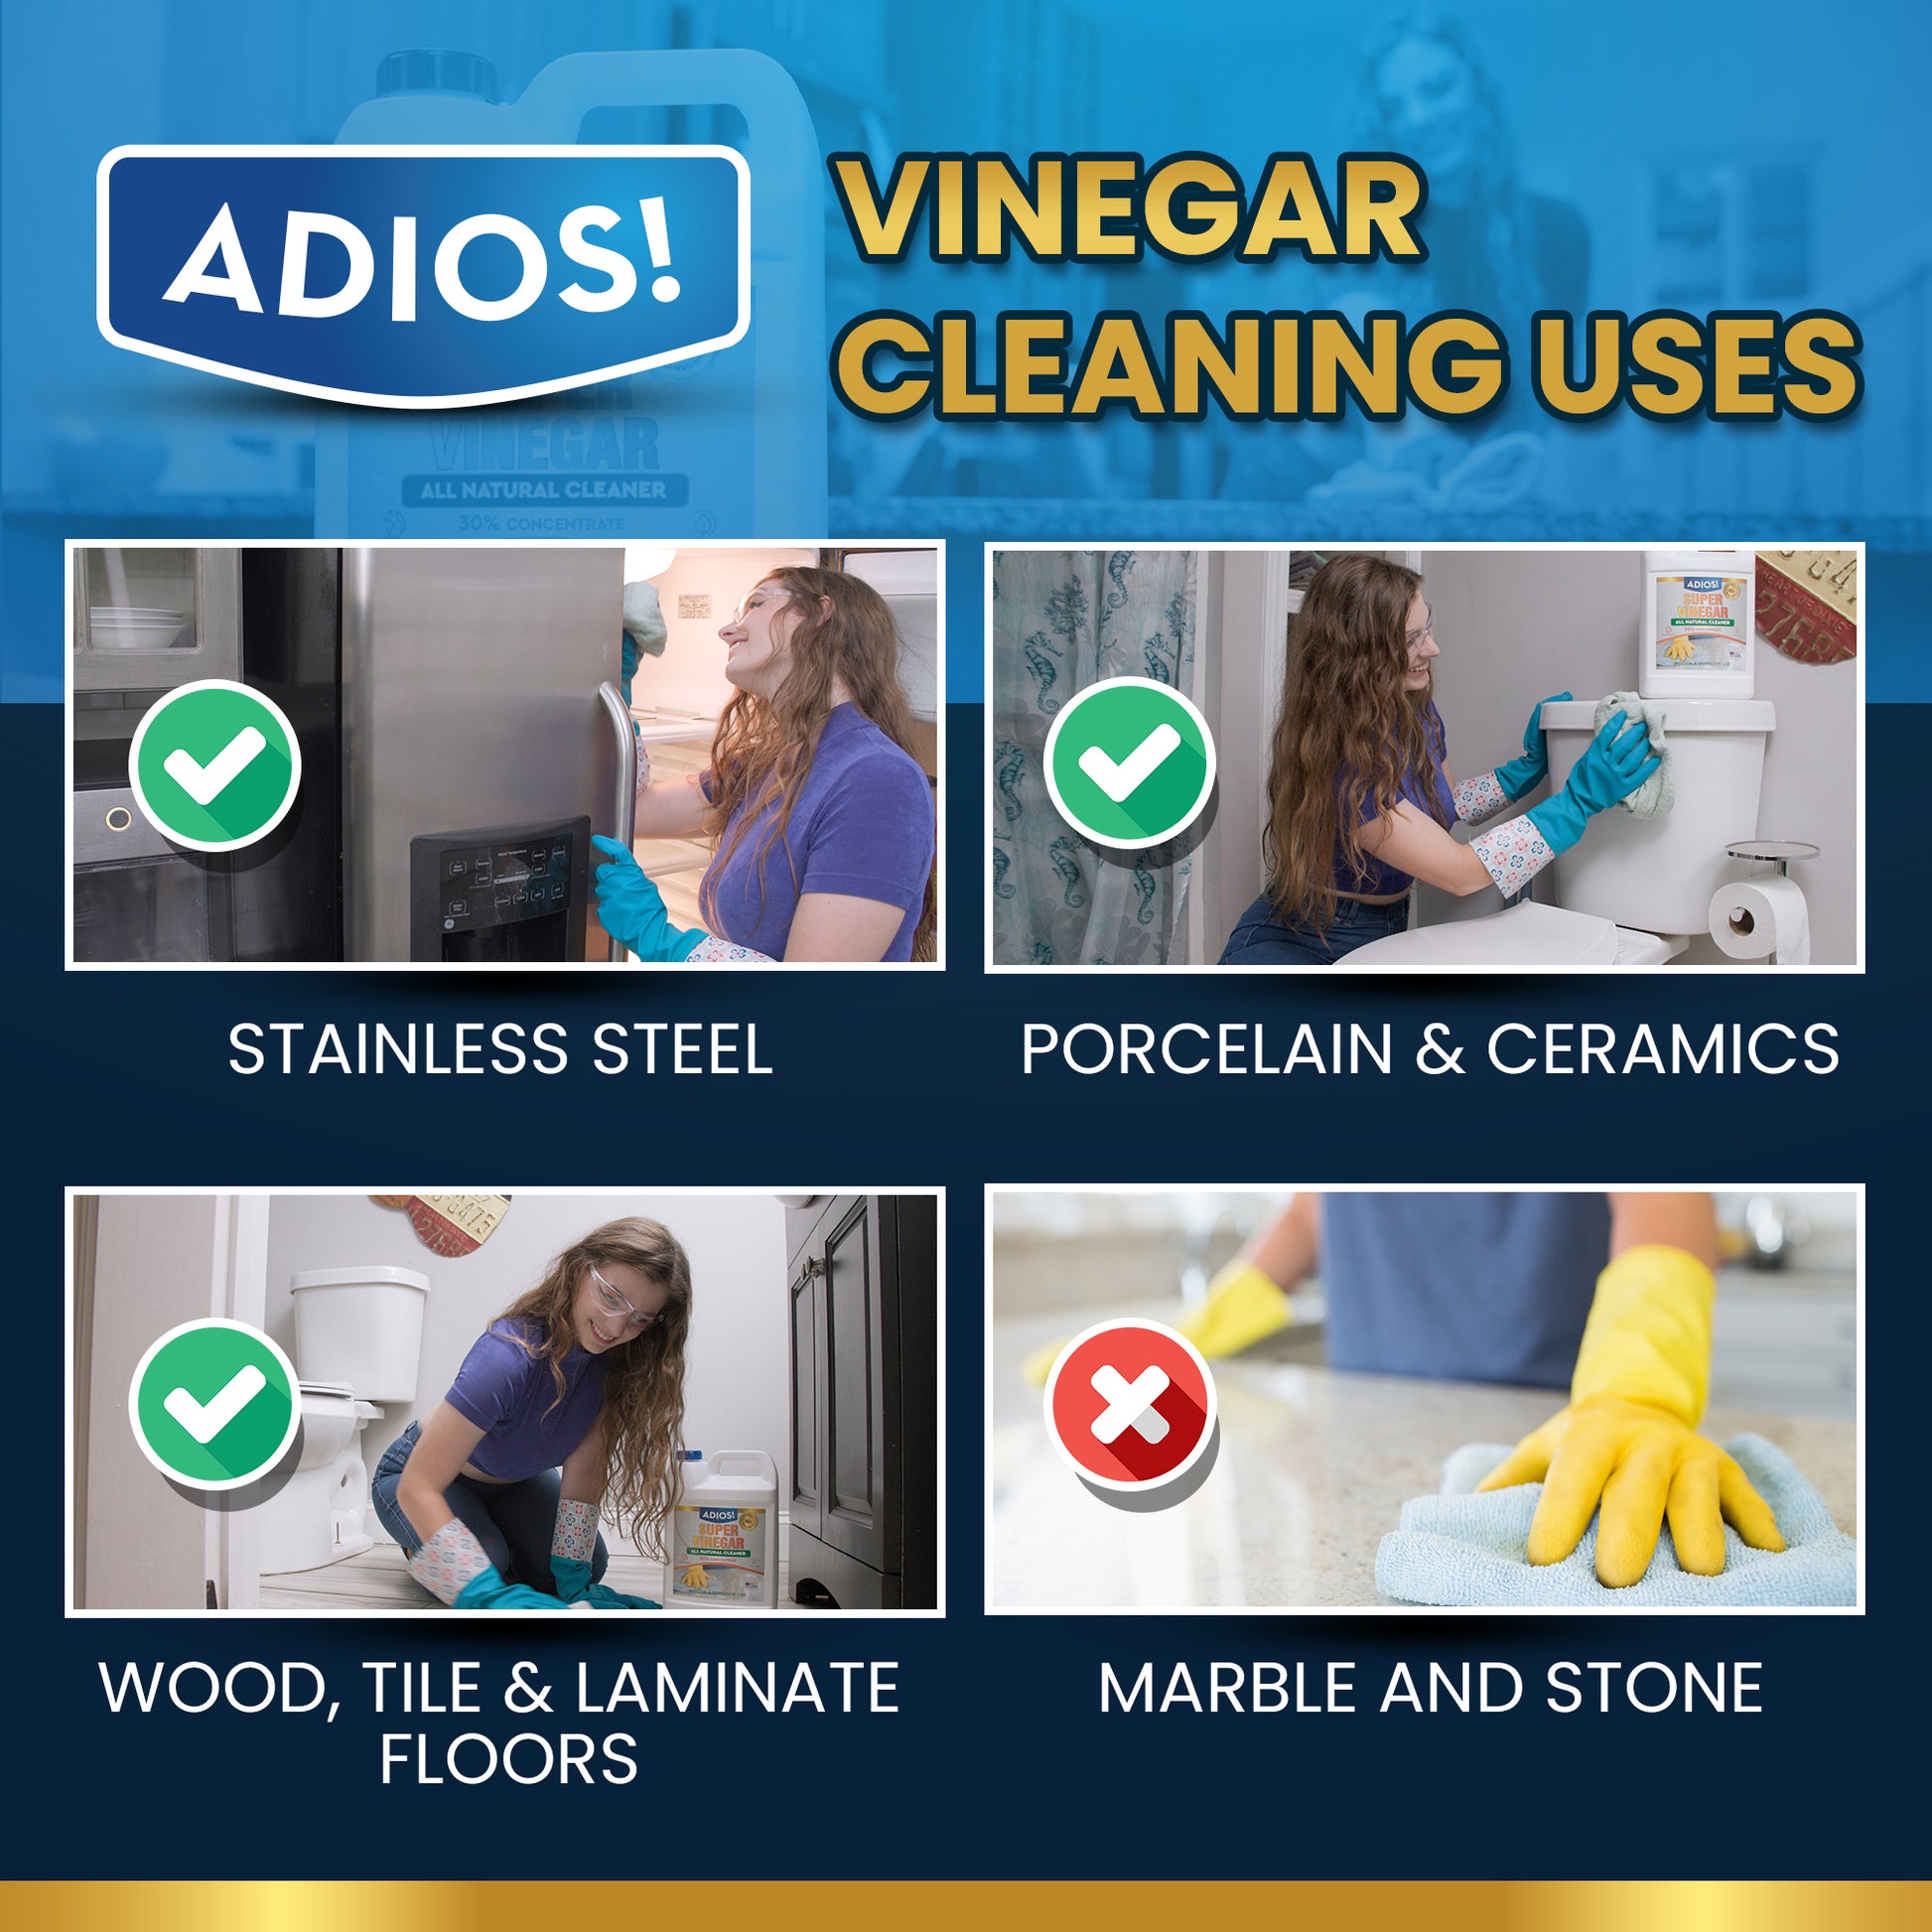 Adios! 30% Vinegar for Cleaning Home - All Purpose Vinegar, Thirty Percent Concentrate Makes 3 Quarts of White Cleaning Vinegar (16oz)